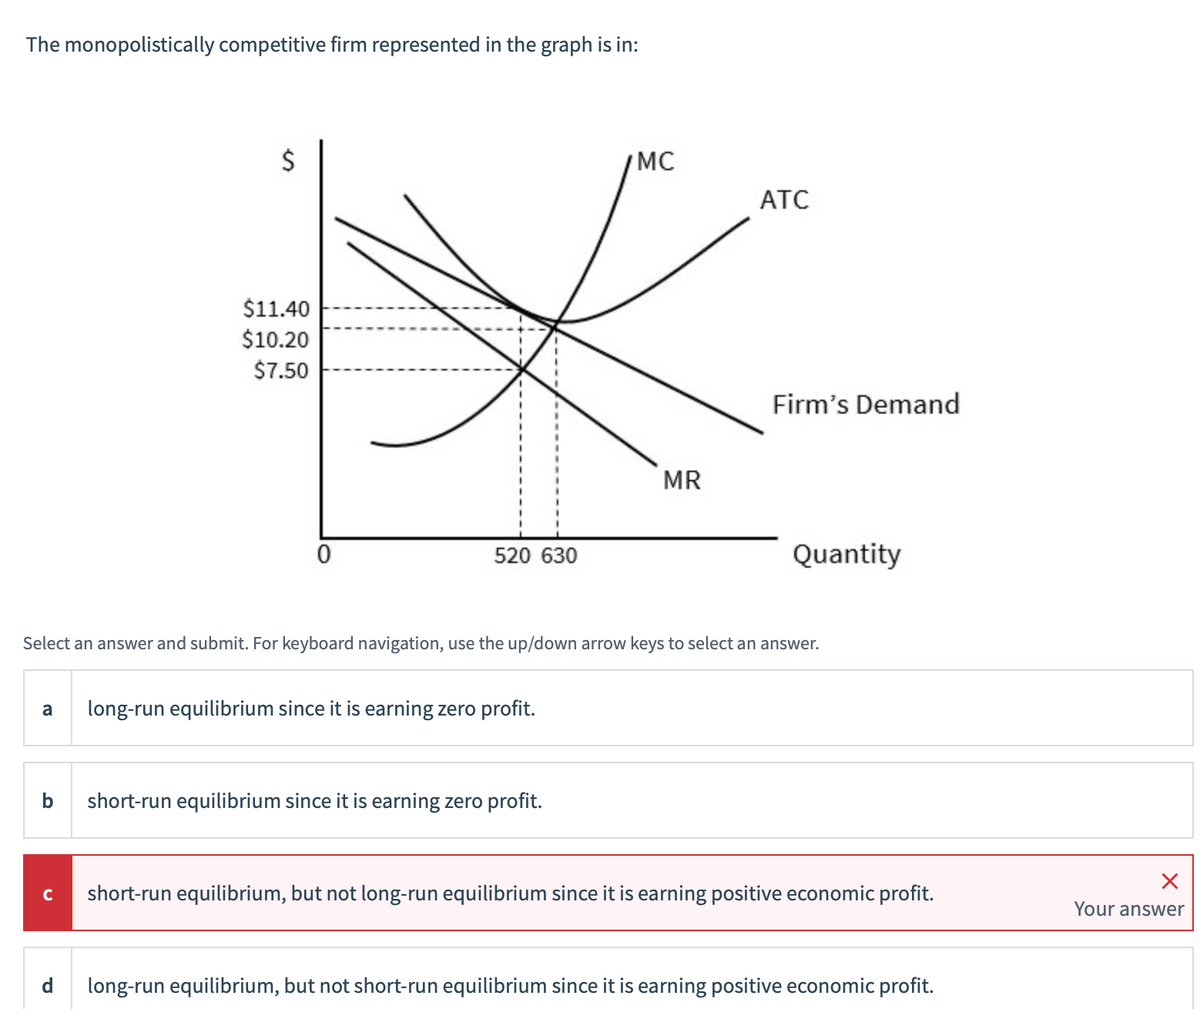 The monopolistically competitive firm represented in the graph is in:
$
$11.40
$10.20
$7.50
0
520 630
MC
ATC
MR
Firm's Demand
Quantity
Select an answer and submit. For keyboard navigation, use the up/down arrow keys to select an answer.
a
long-run equilibrium since it is earning zero profit.
b
short-run equilibrium since it is earning zero profit.
C short-run equilibrium, but not long-run equilibrium since it is earning positive economic profit.
d
long-run equilibrium, but not short-run equilibrium since it is earning positive economic profit.
Your answer